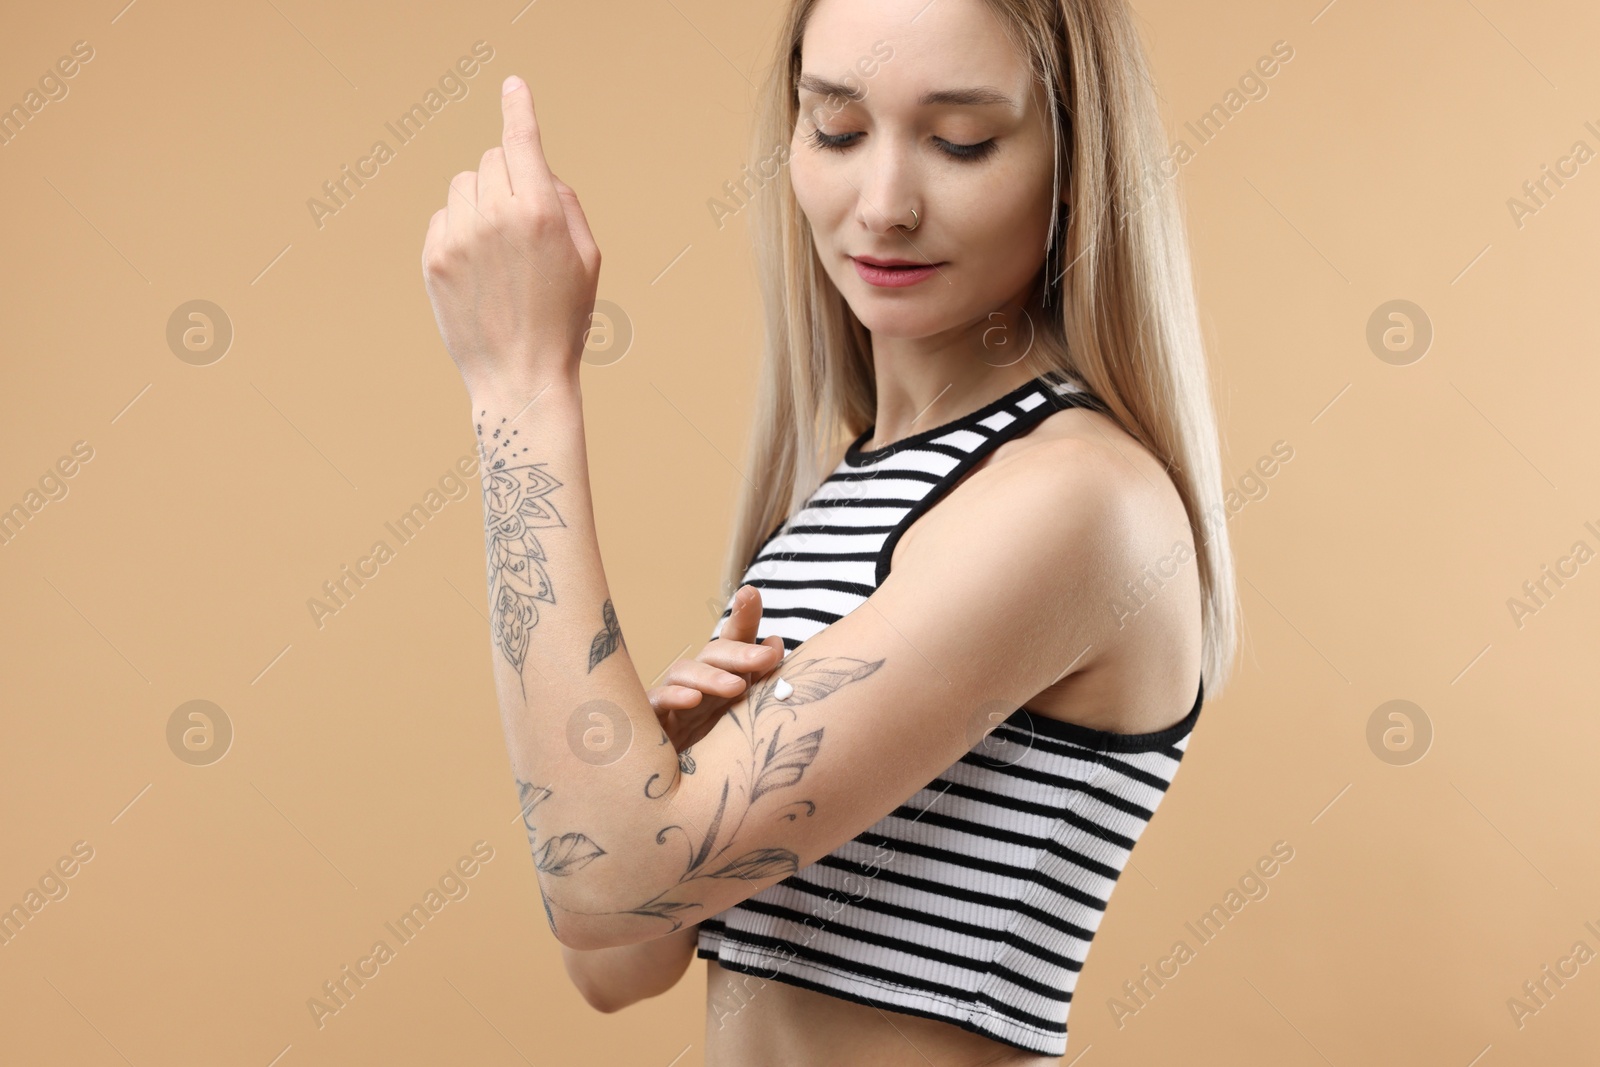 Photo of Tattooed woman applying cream onto her arm on beige background